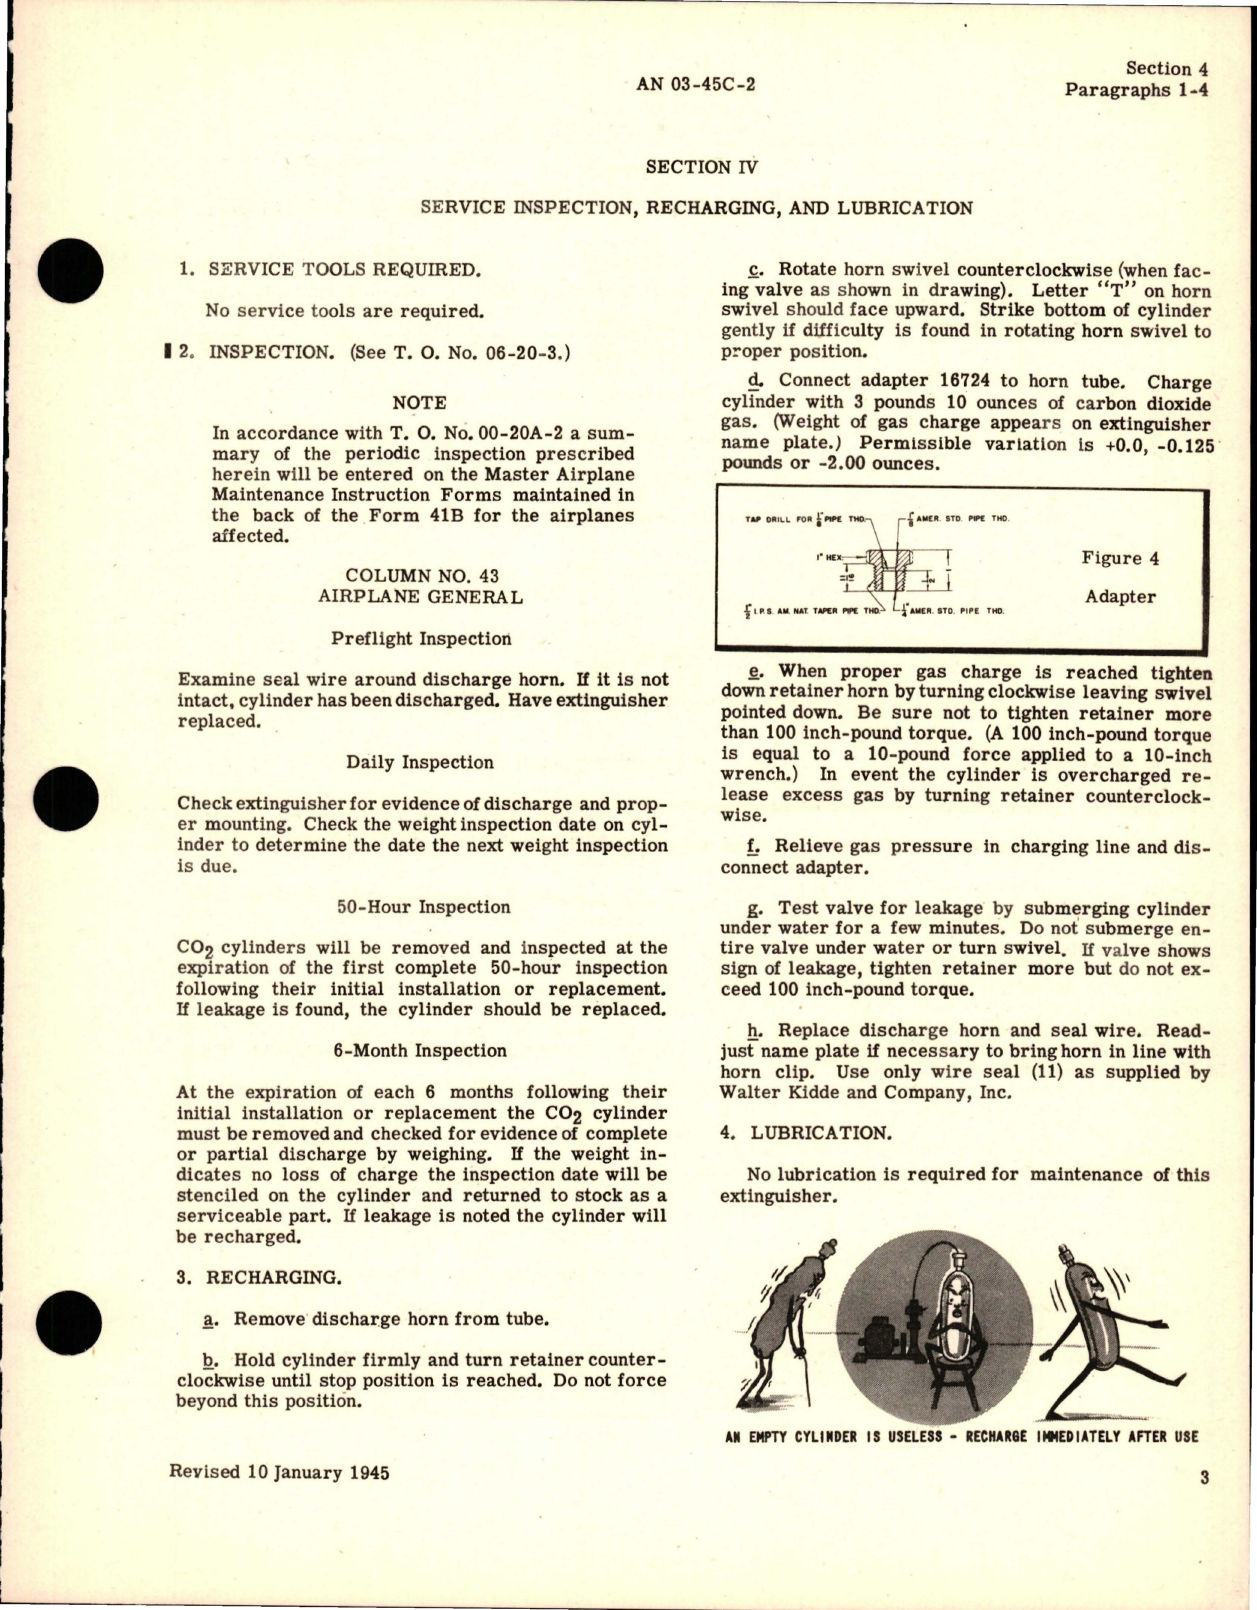 Sample page 7 from AirCorps Library document: Instructions with Parts Catalog for Portable Fire Extinguisher - A-17